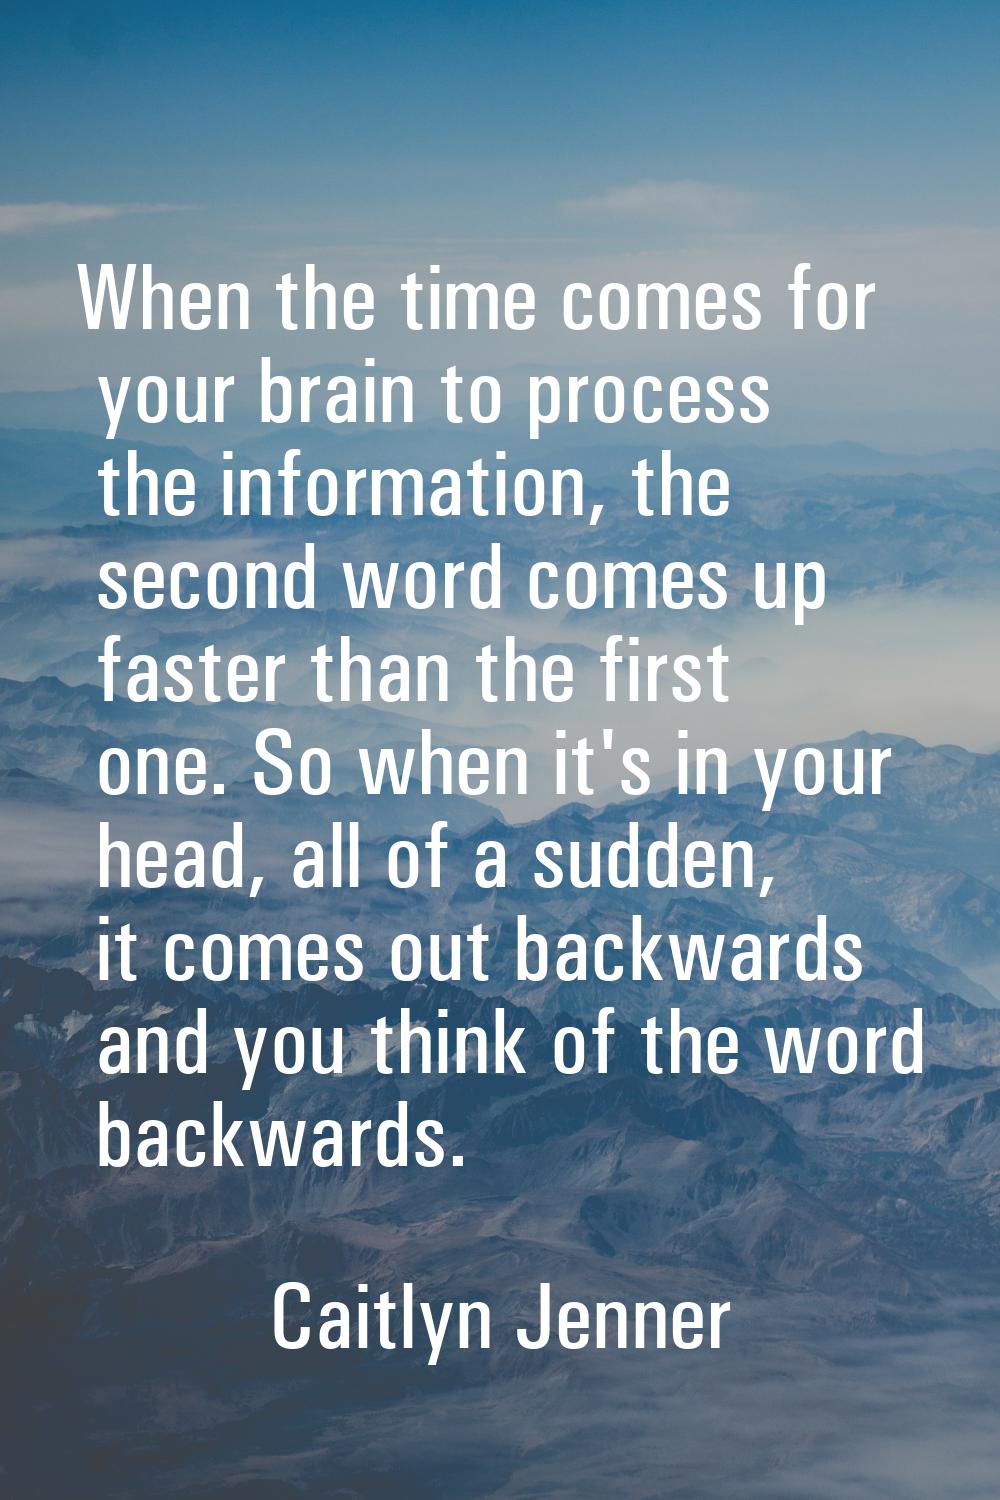 When the time comes for your brain to process the information, the second word comes up faster than